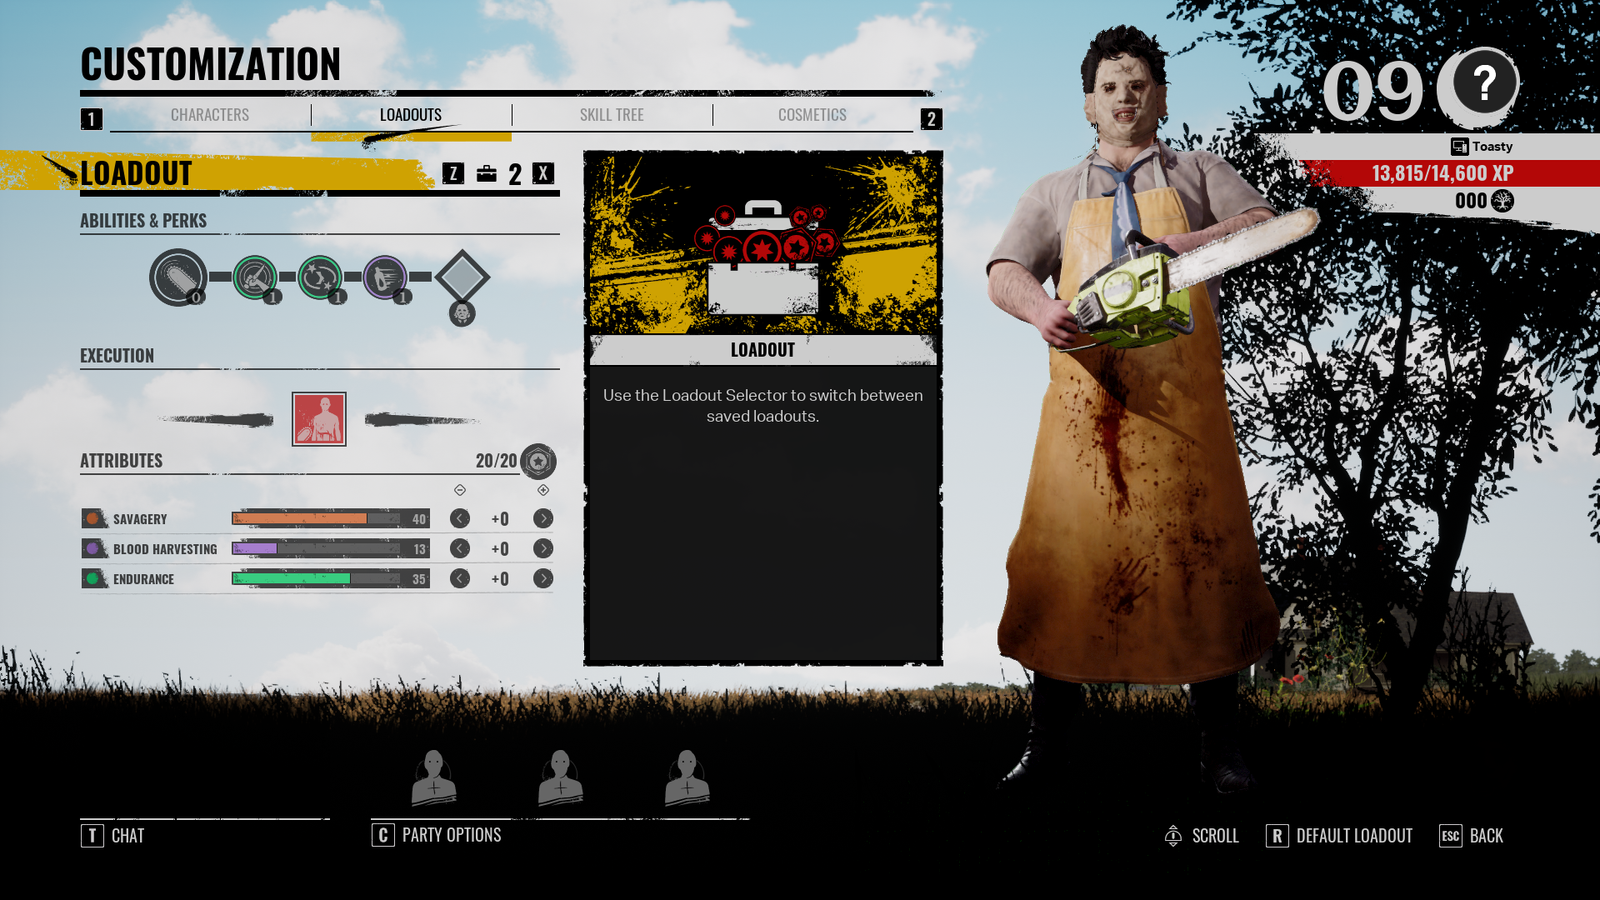 Leatherface customisation screen in texas chain saw massacre